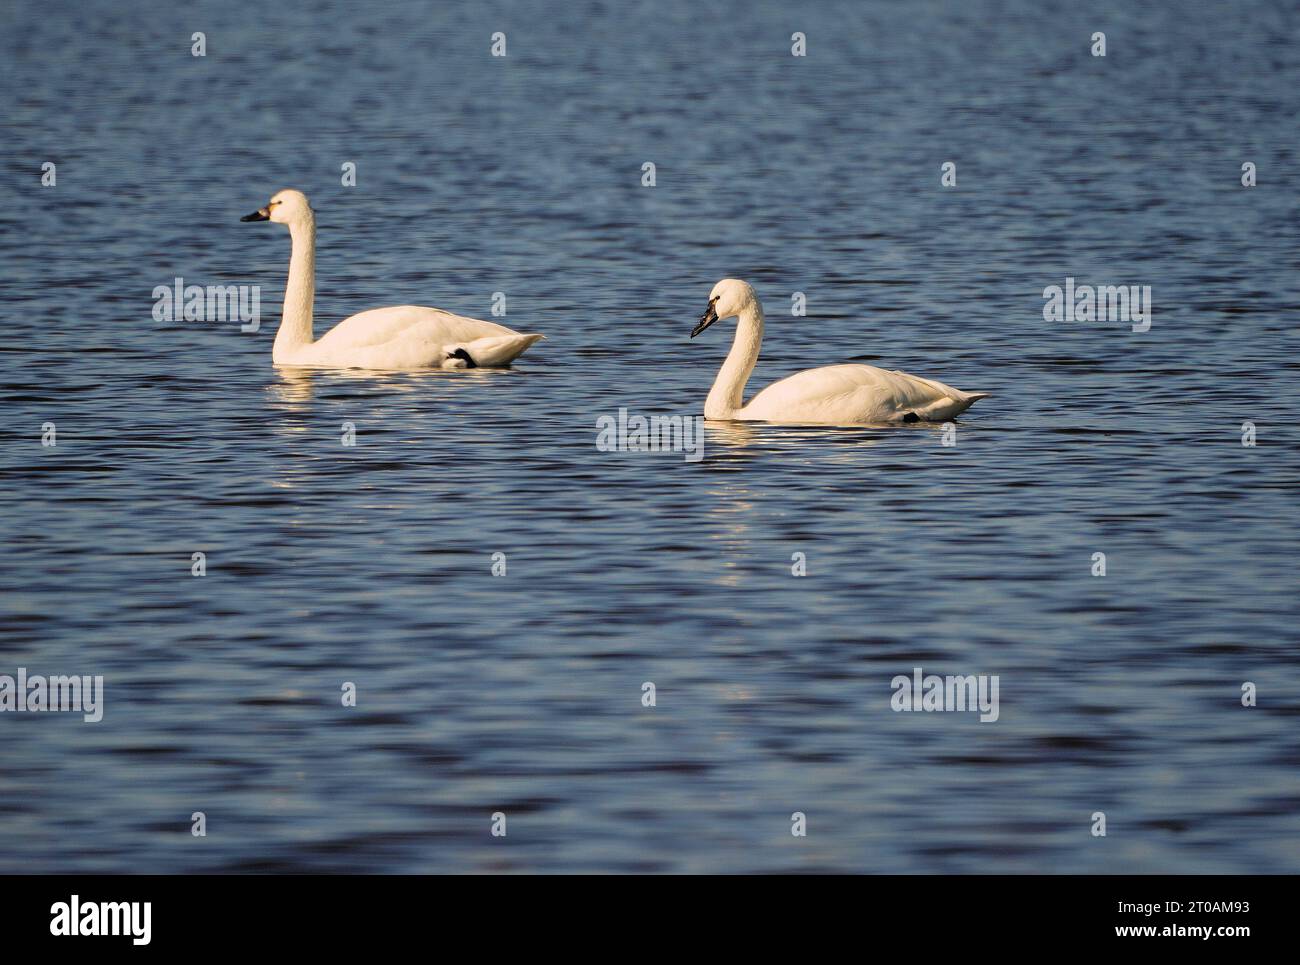 Swans, Ducks and Geese Migrating to the Pristine Coast of the Outer Banks of North Carolina Stock Photo